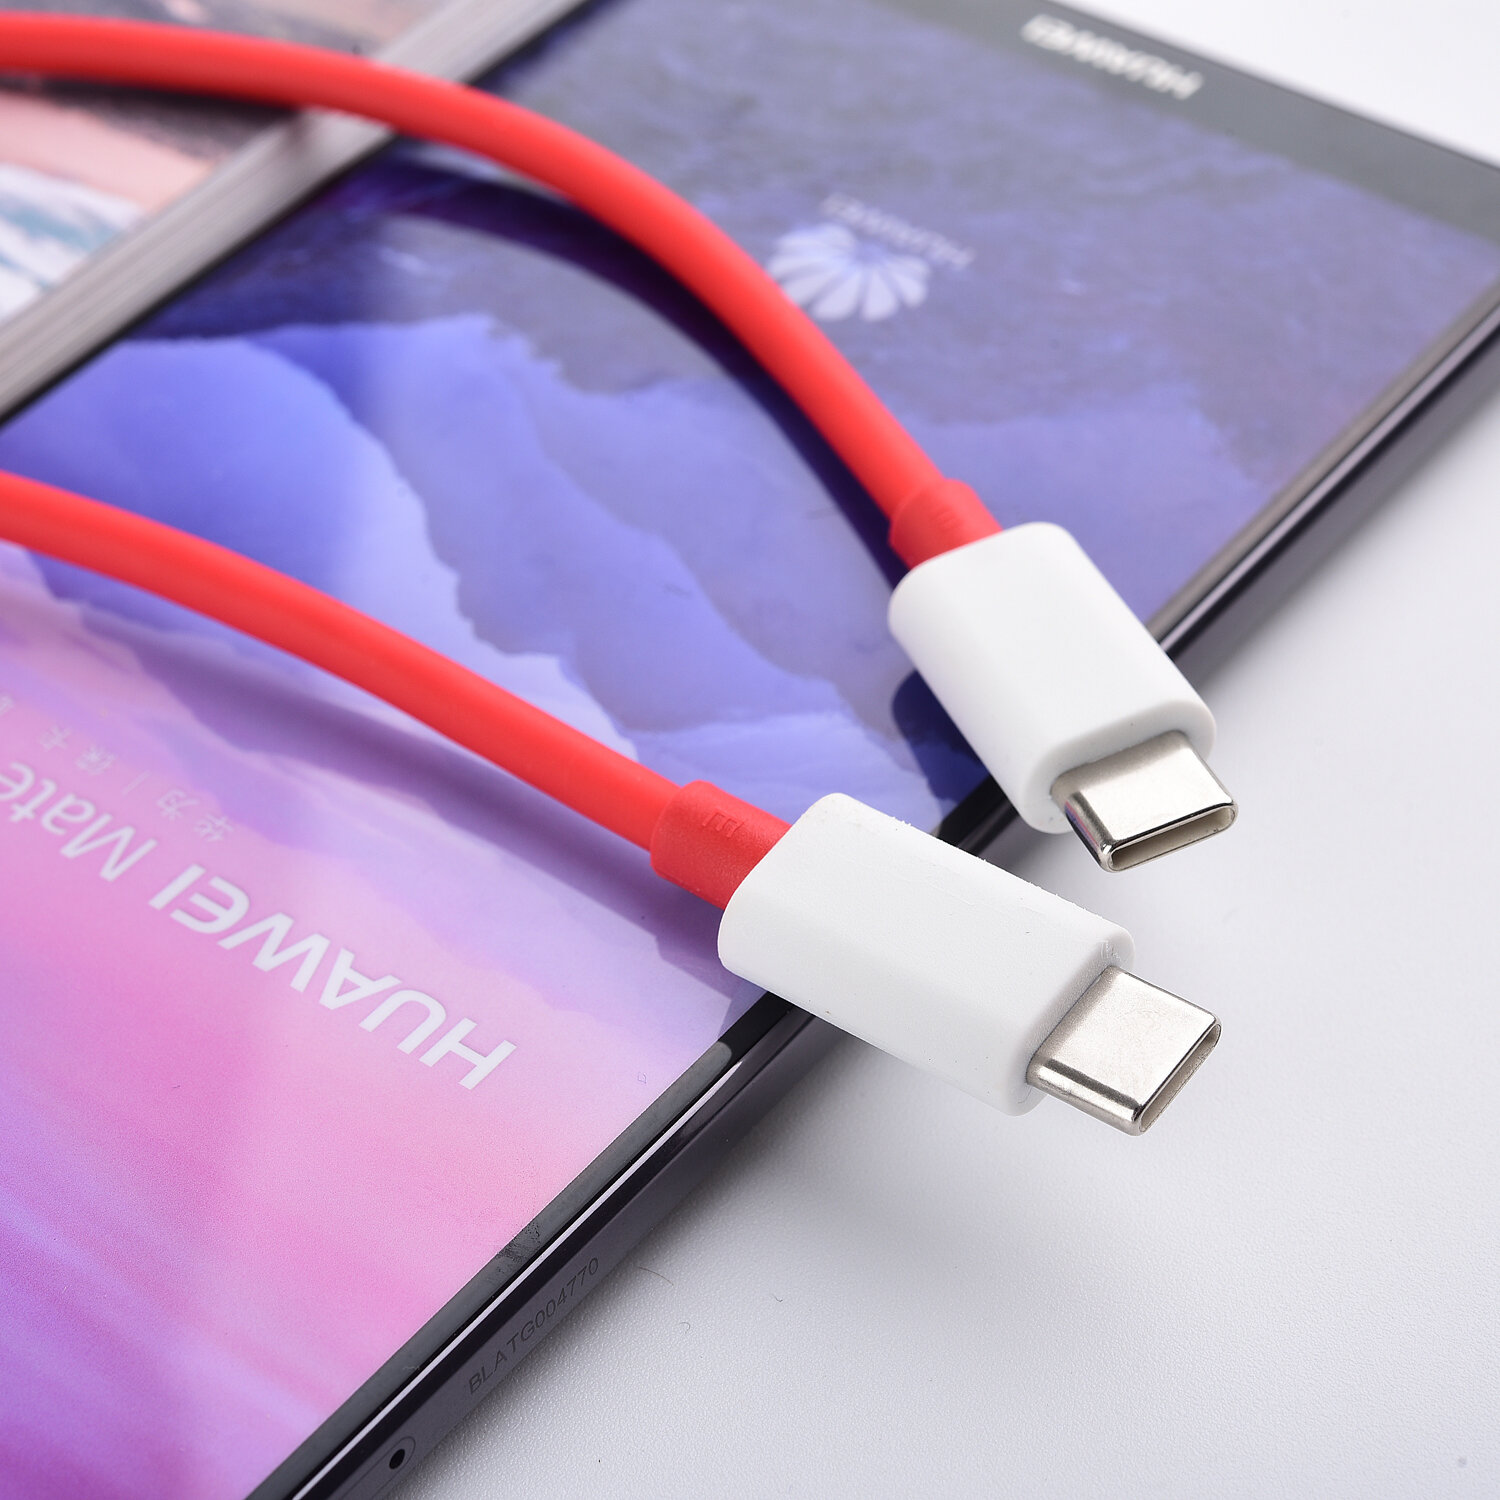 

Oneplus 8T 8 Pro 6.5A Warp Charge Cable Type-C To USB-C PD Dash Quick Cord 1M/2M Data Cable for One Plus 1+ 7 7T 6 6T 5